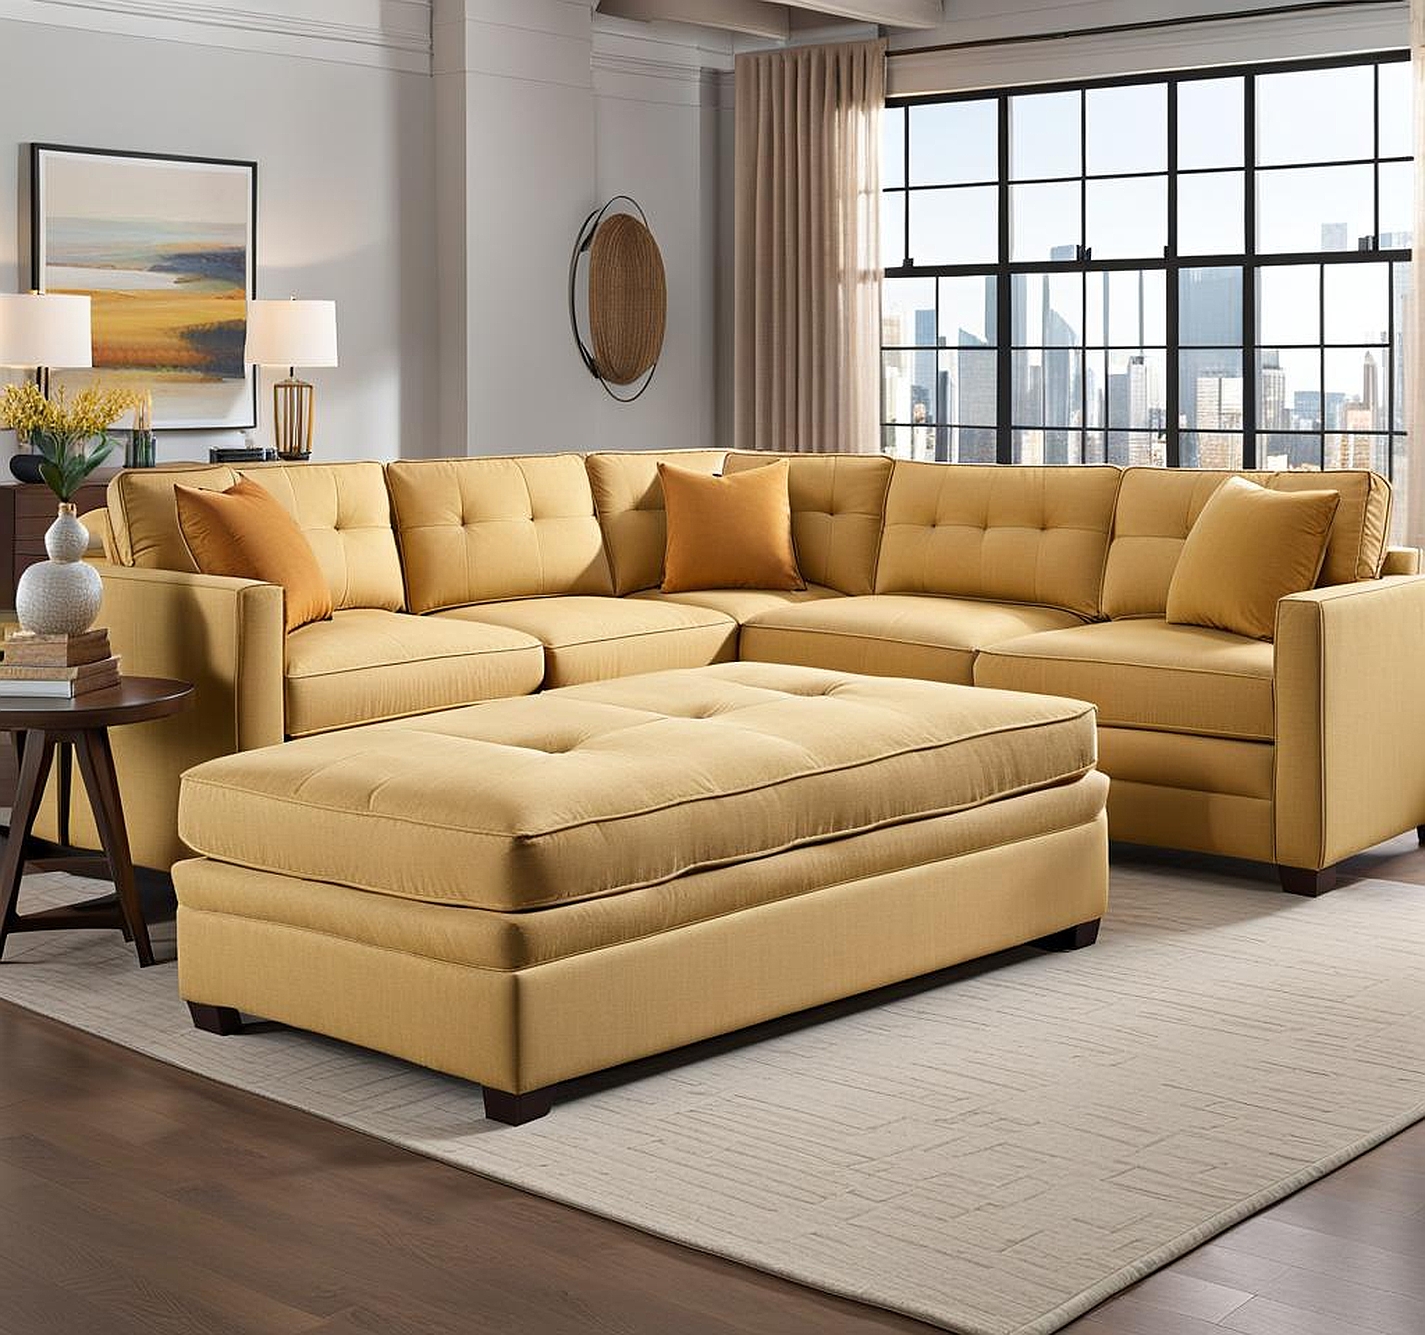 The Benefits of Using Claire 3-piece Sleeper Sectional for a Multi-functional Space